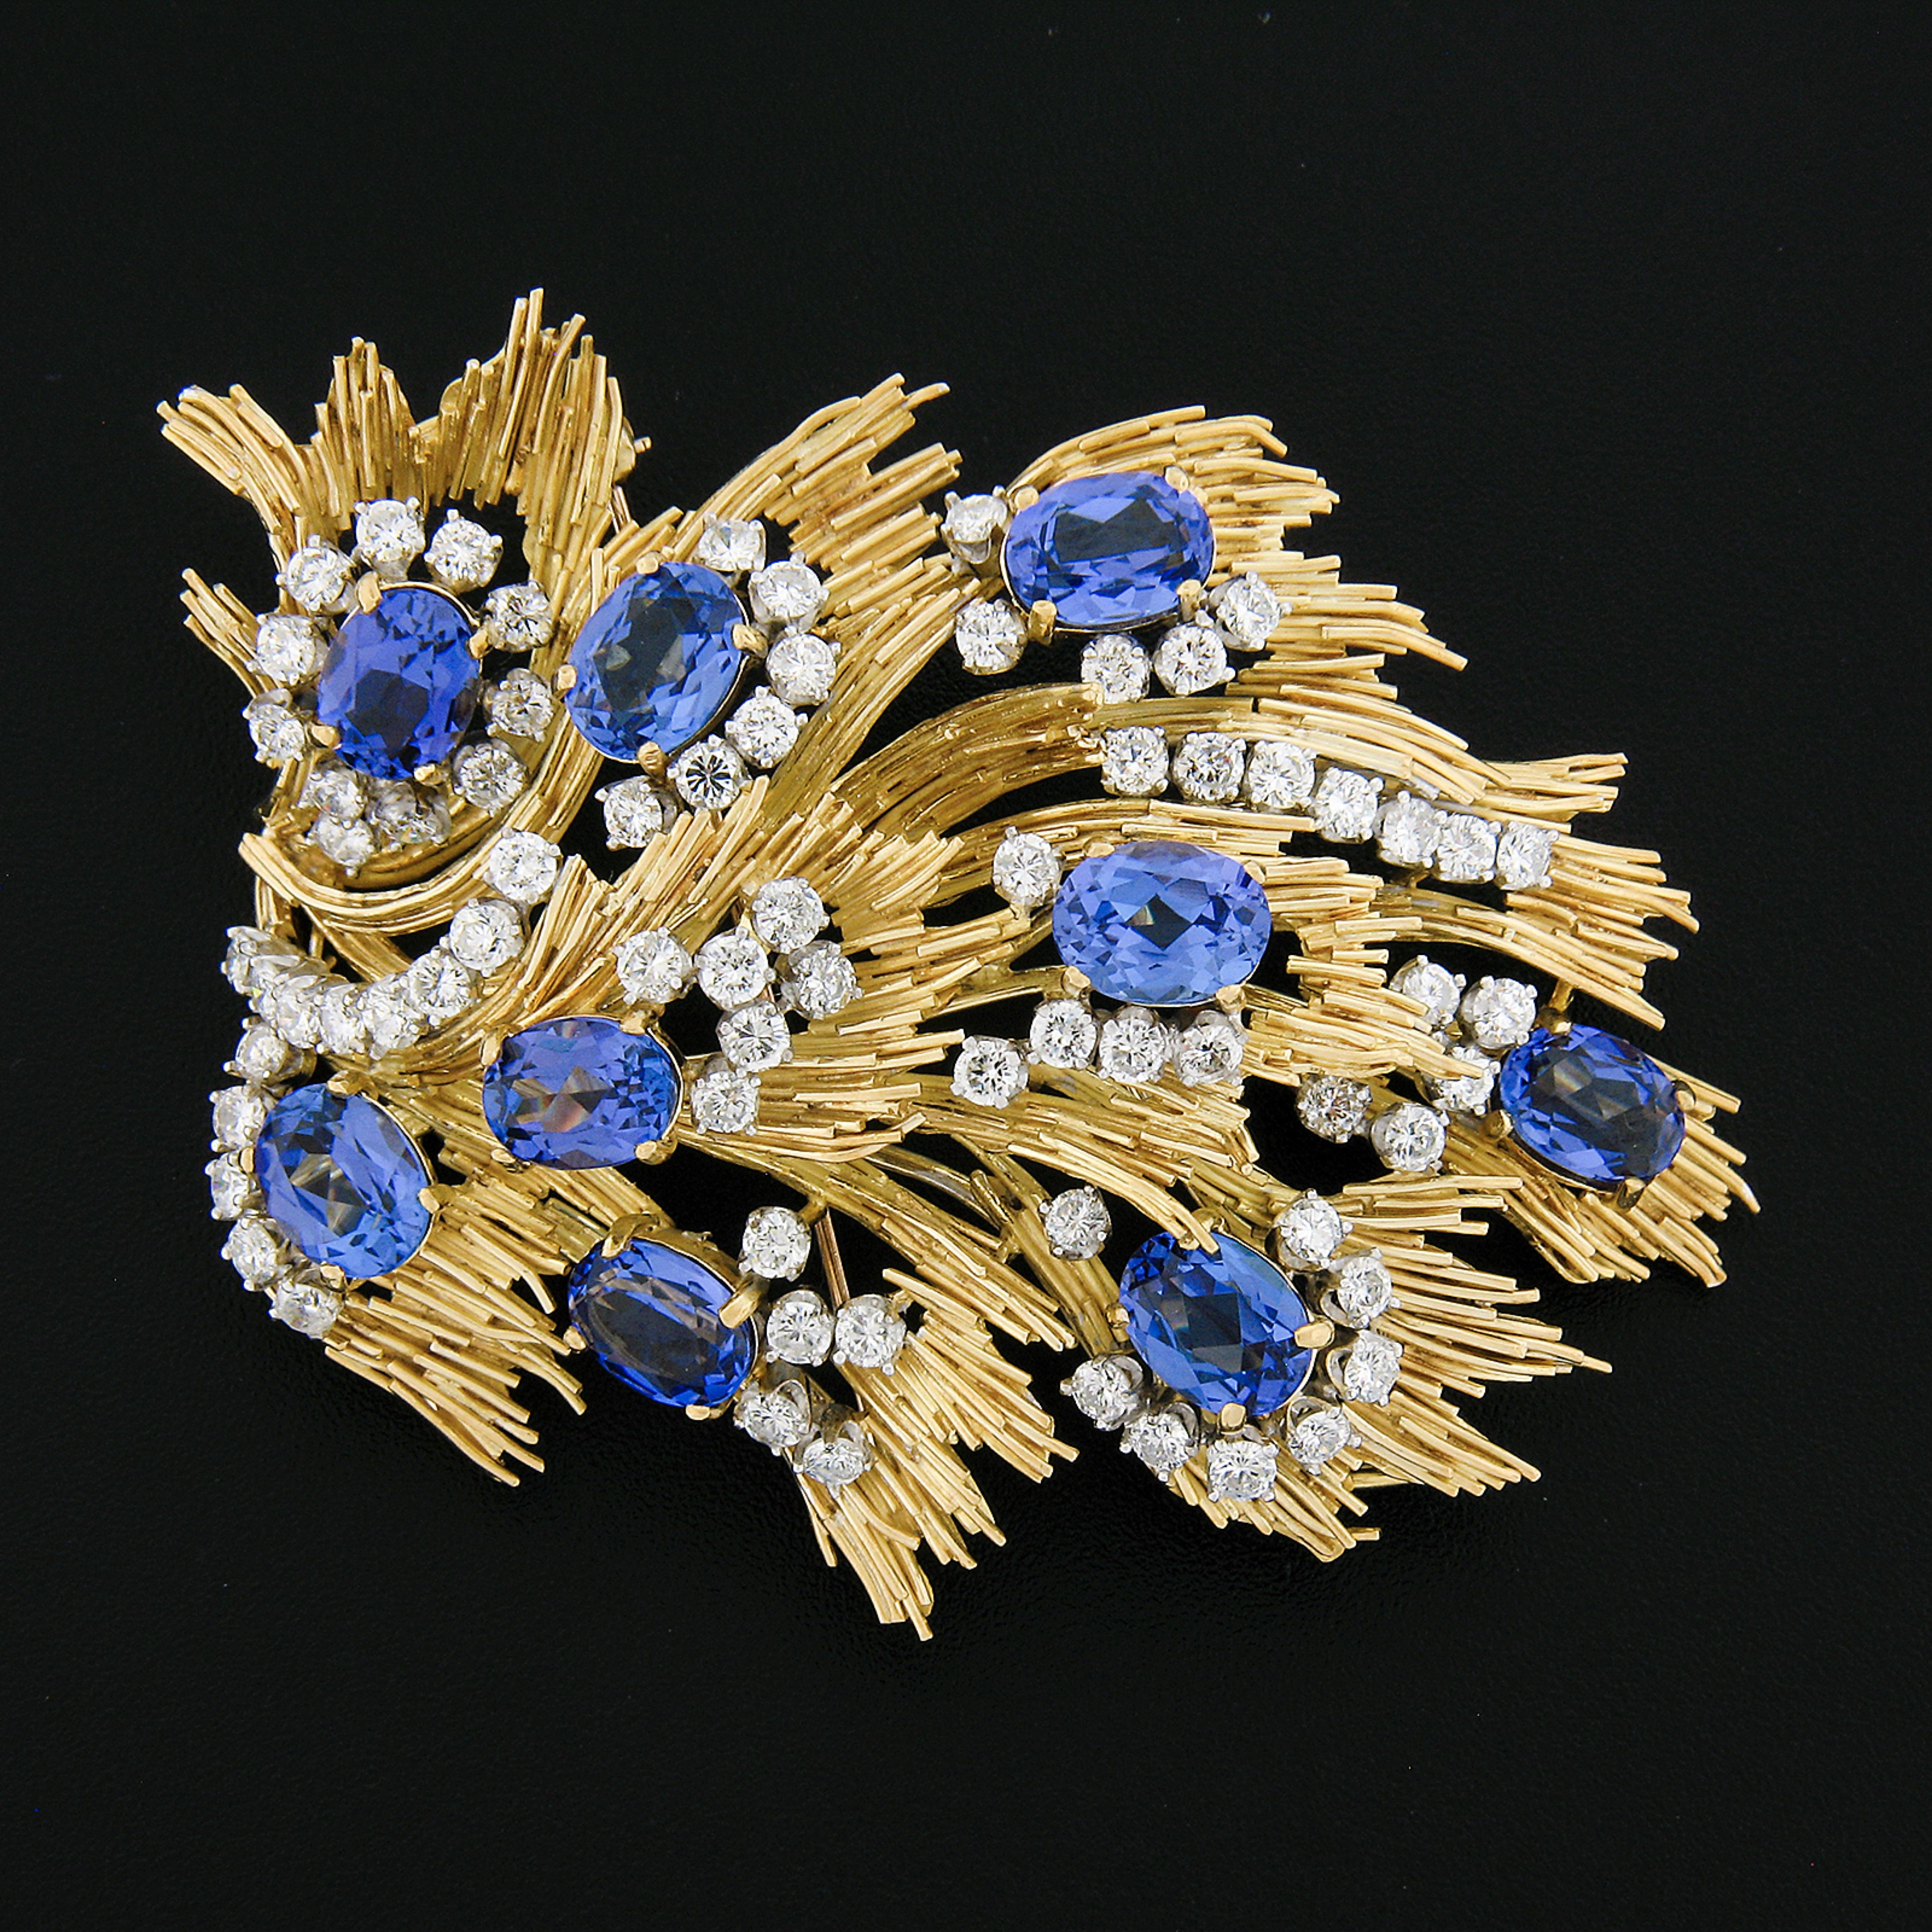 Here we have a stunning, vintage Jack Gutschneider statement brooch hand crafted in solid 18k yellow gold and adorned with the most amazing quality natural tanzanite and diamonds throughout the super unique flames design. Each of the oval tanzanite